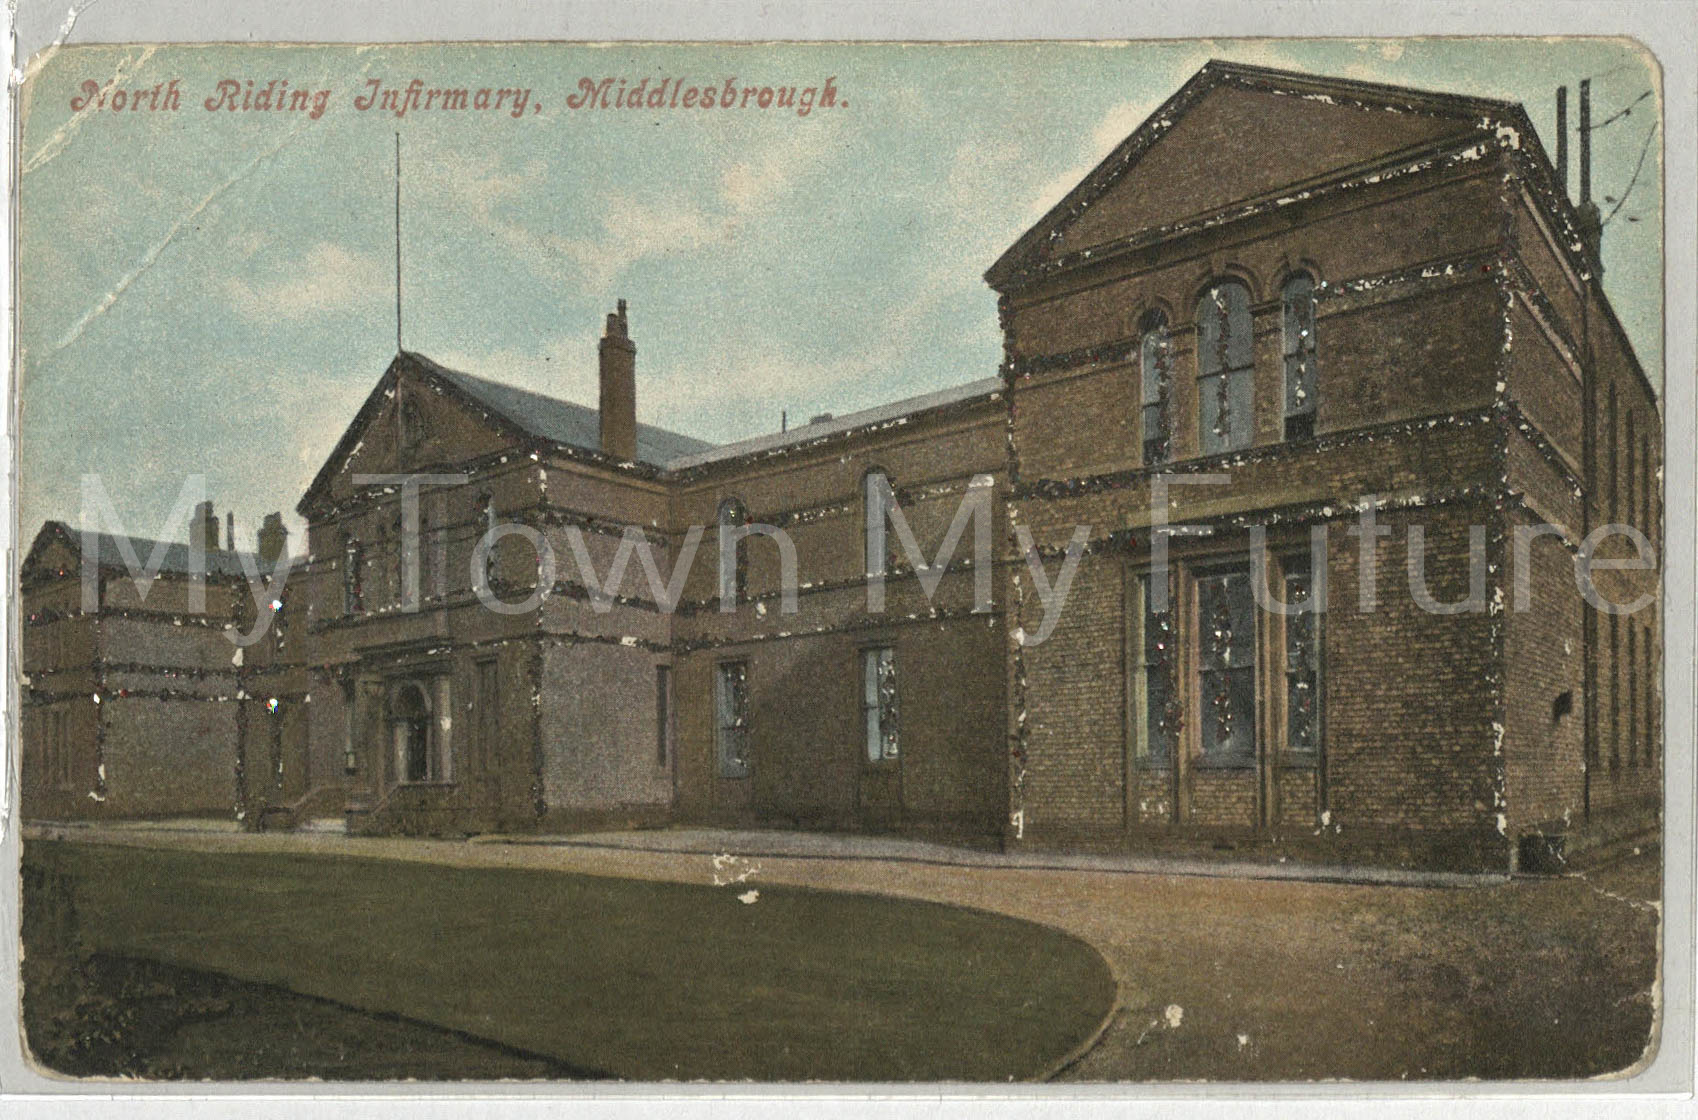 Middlesbrough North Riding Infirmary